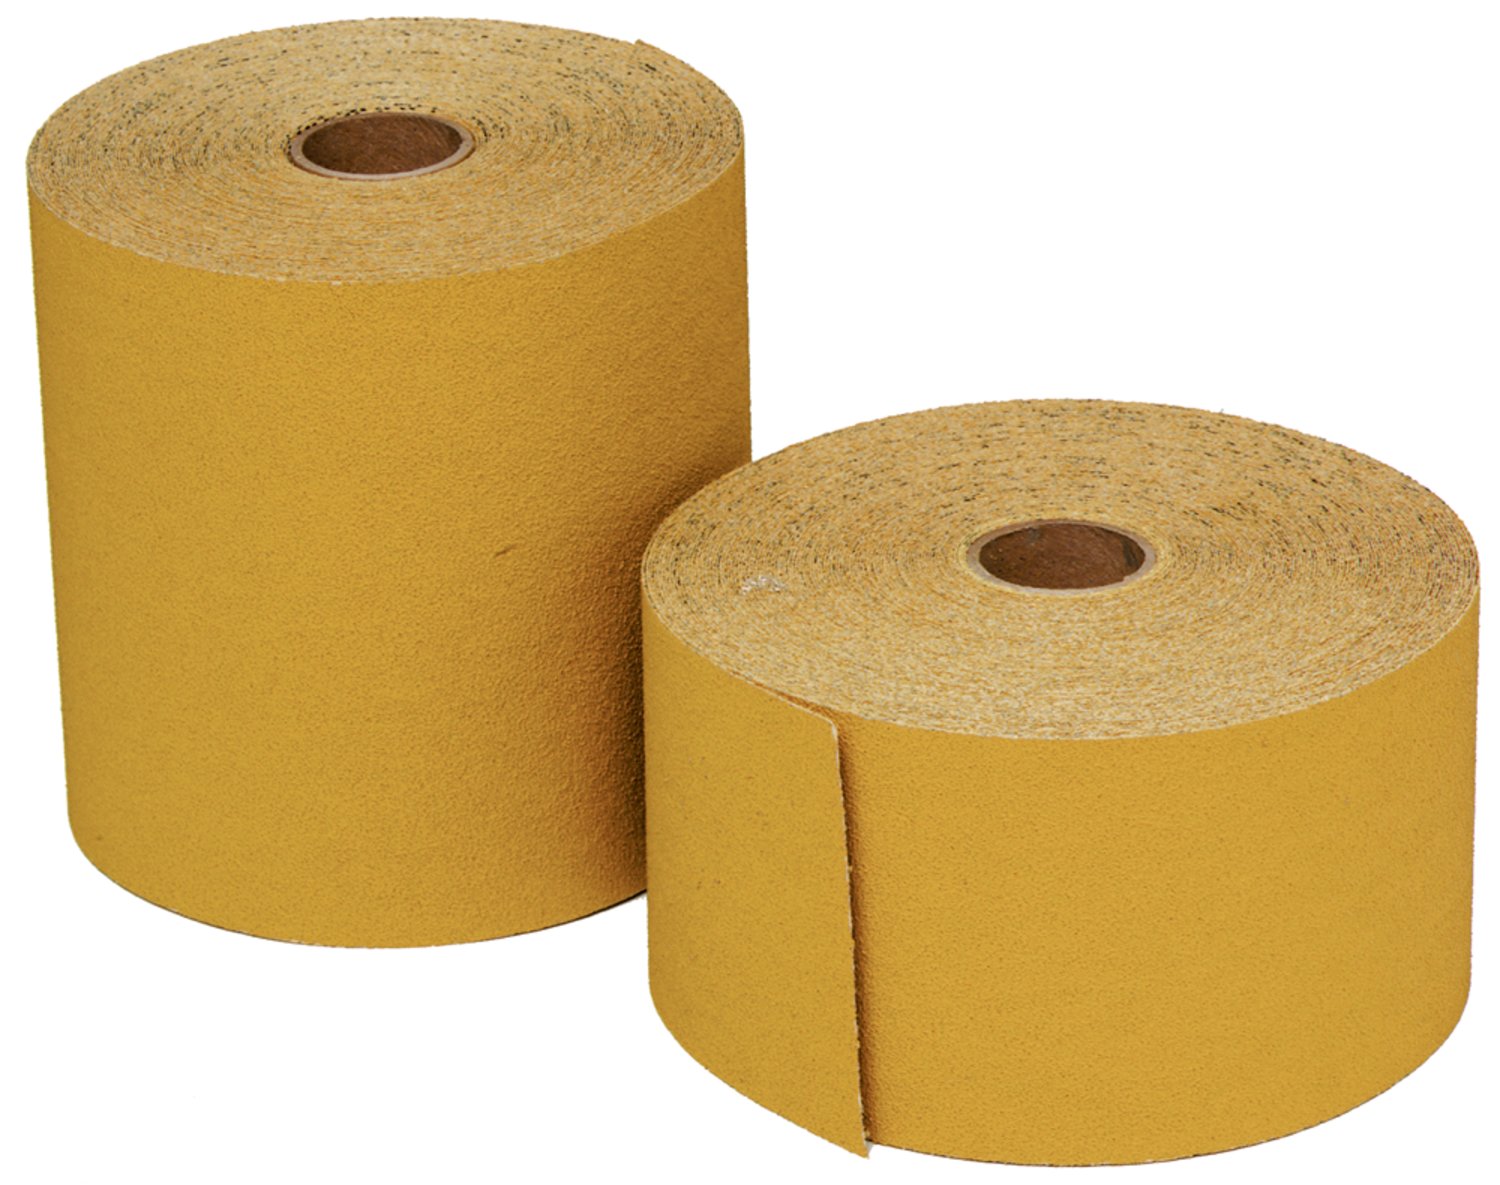 7100035707 - 3M Stikit Gold Paper Roll 216U, P600 A-weight, Config